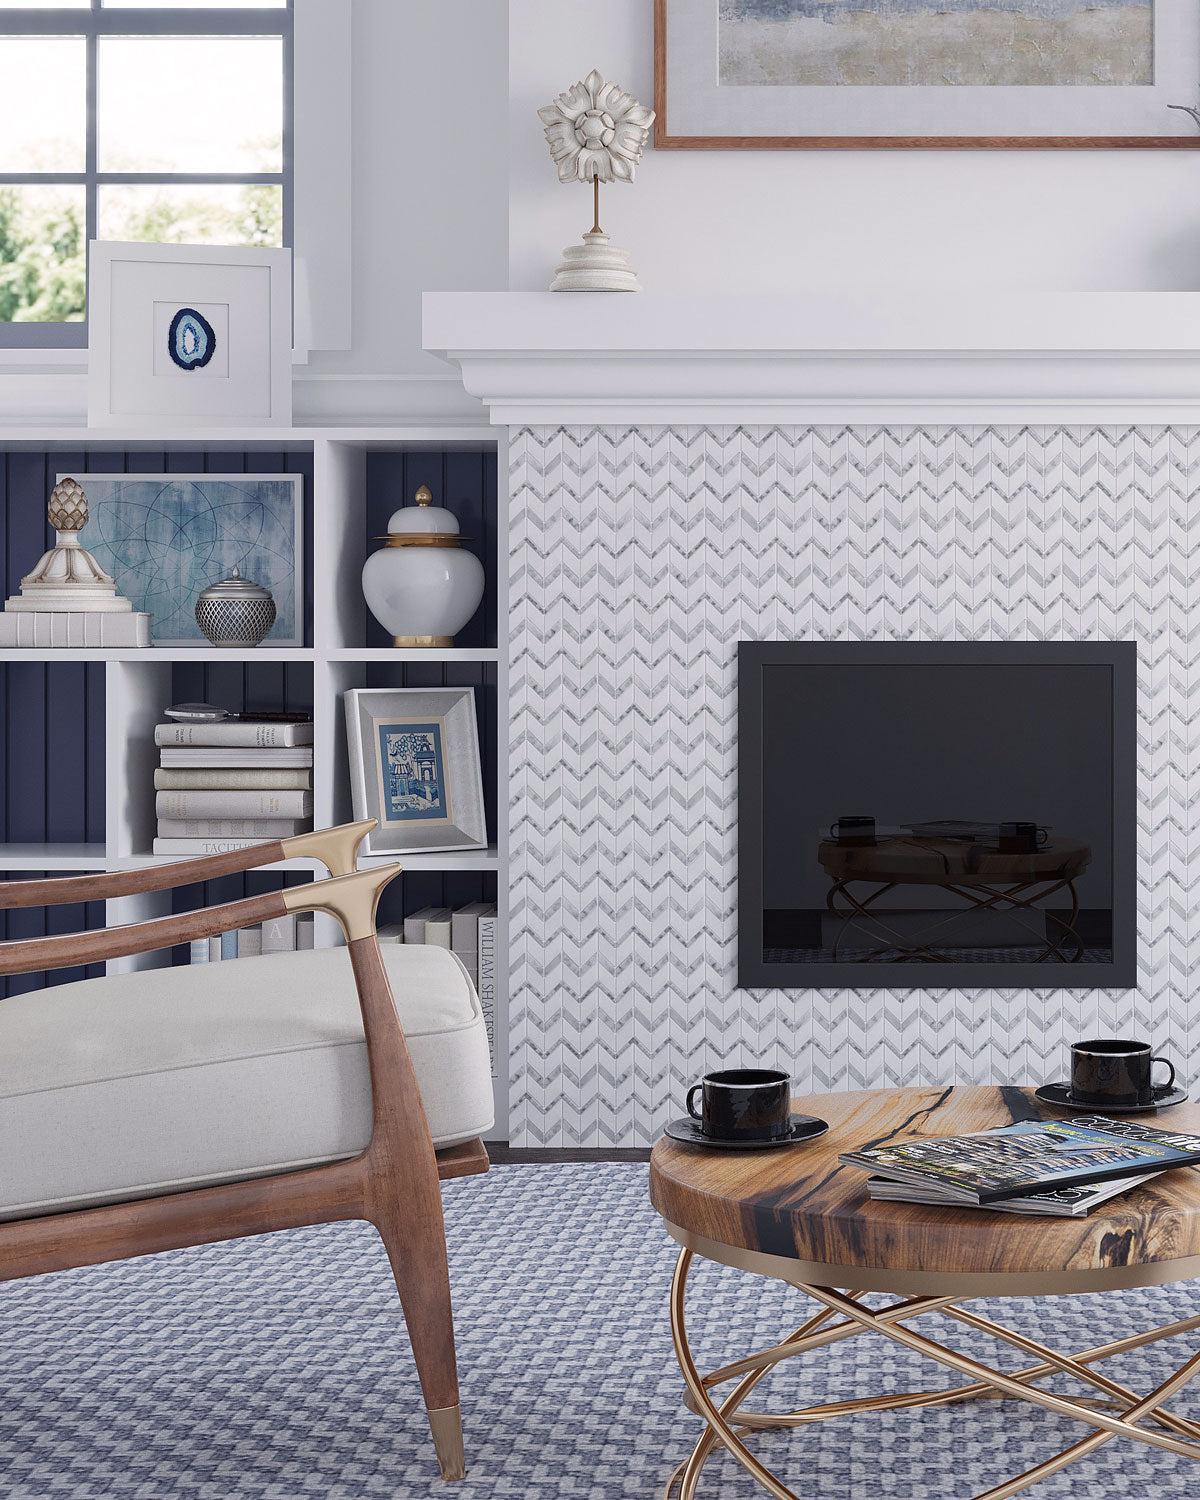 Navy and White Living Room with Carrara Fireplace Tile in A Chevron Pattern